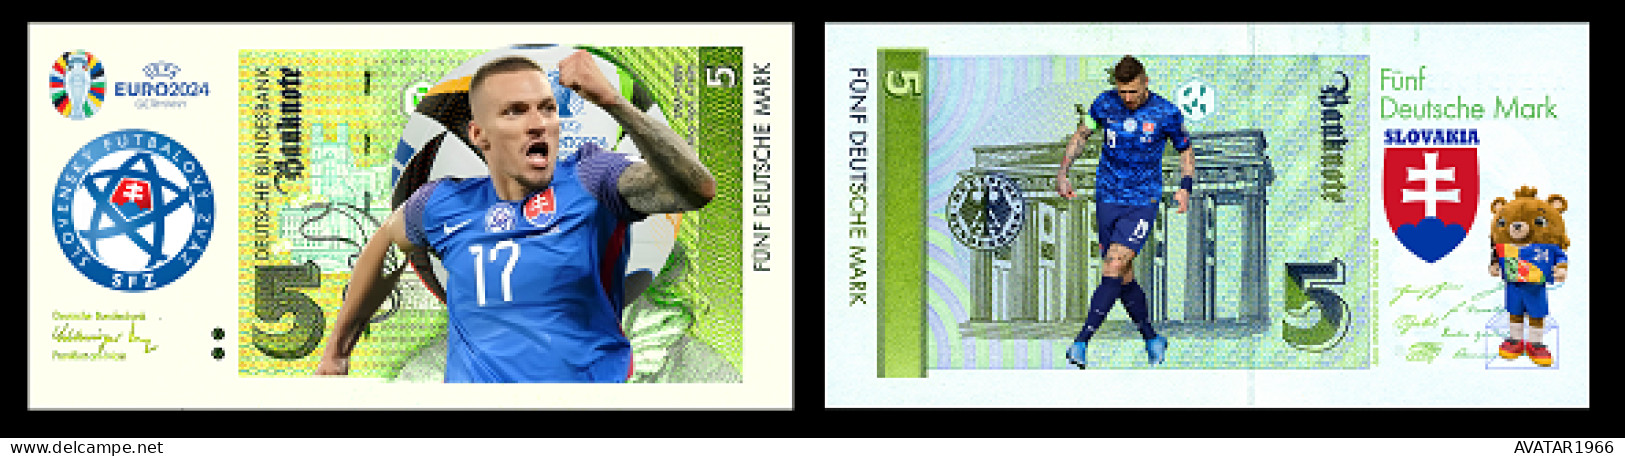 UEFA European Football Championship 2024 Qualified Country Slovakia  8 Pieces Germany Fantasy Paper Money - [15] Commemoratives & Special Issues